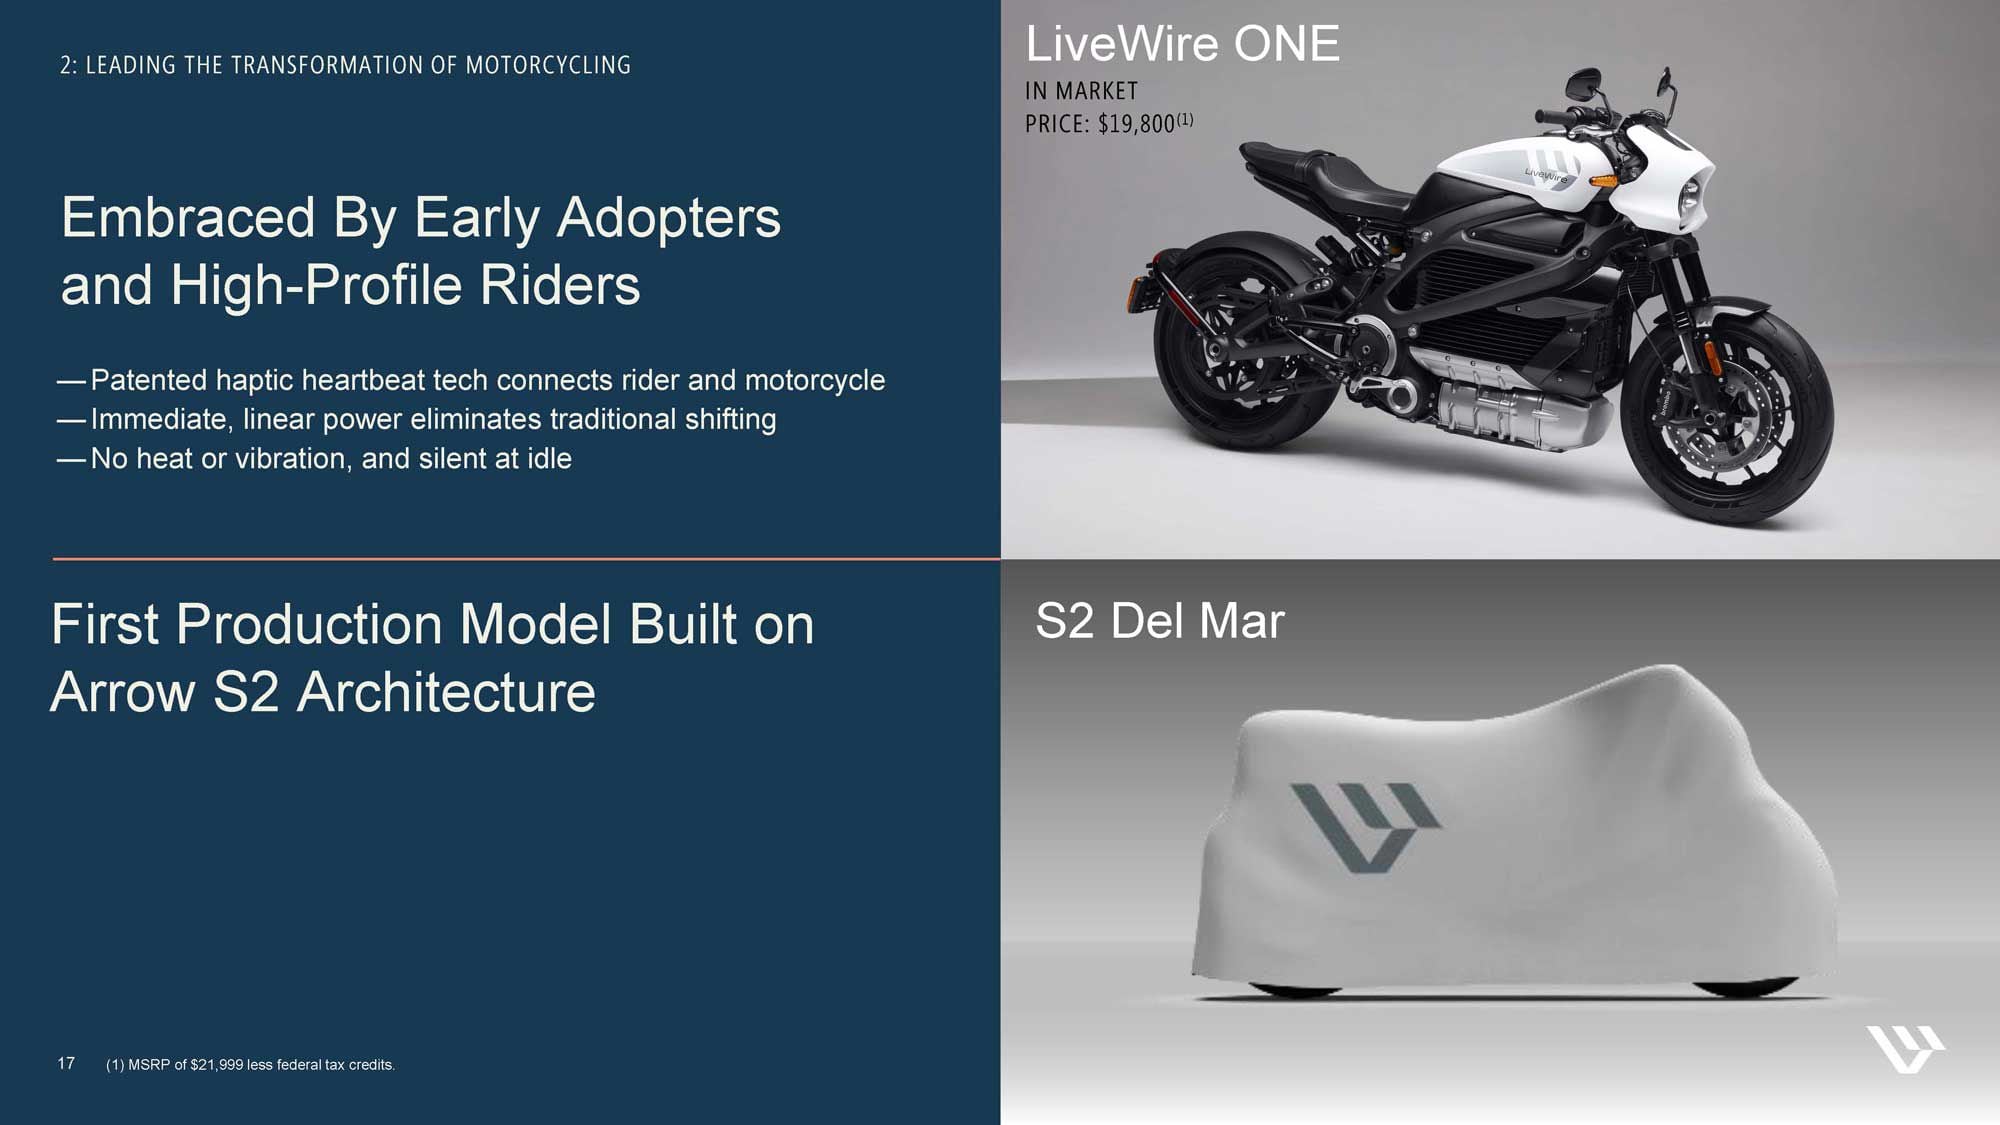 LiveWire One—a reduced-cost rebadged version of the Harley-Davidson LiveWire—was the first step in separating electric motorcycles from the mothership. Arrow S2 architecture will be the basis for a “middleweight” and presumably lower-cost motorcycle called Del Mar.